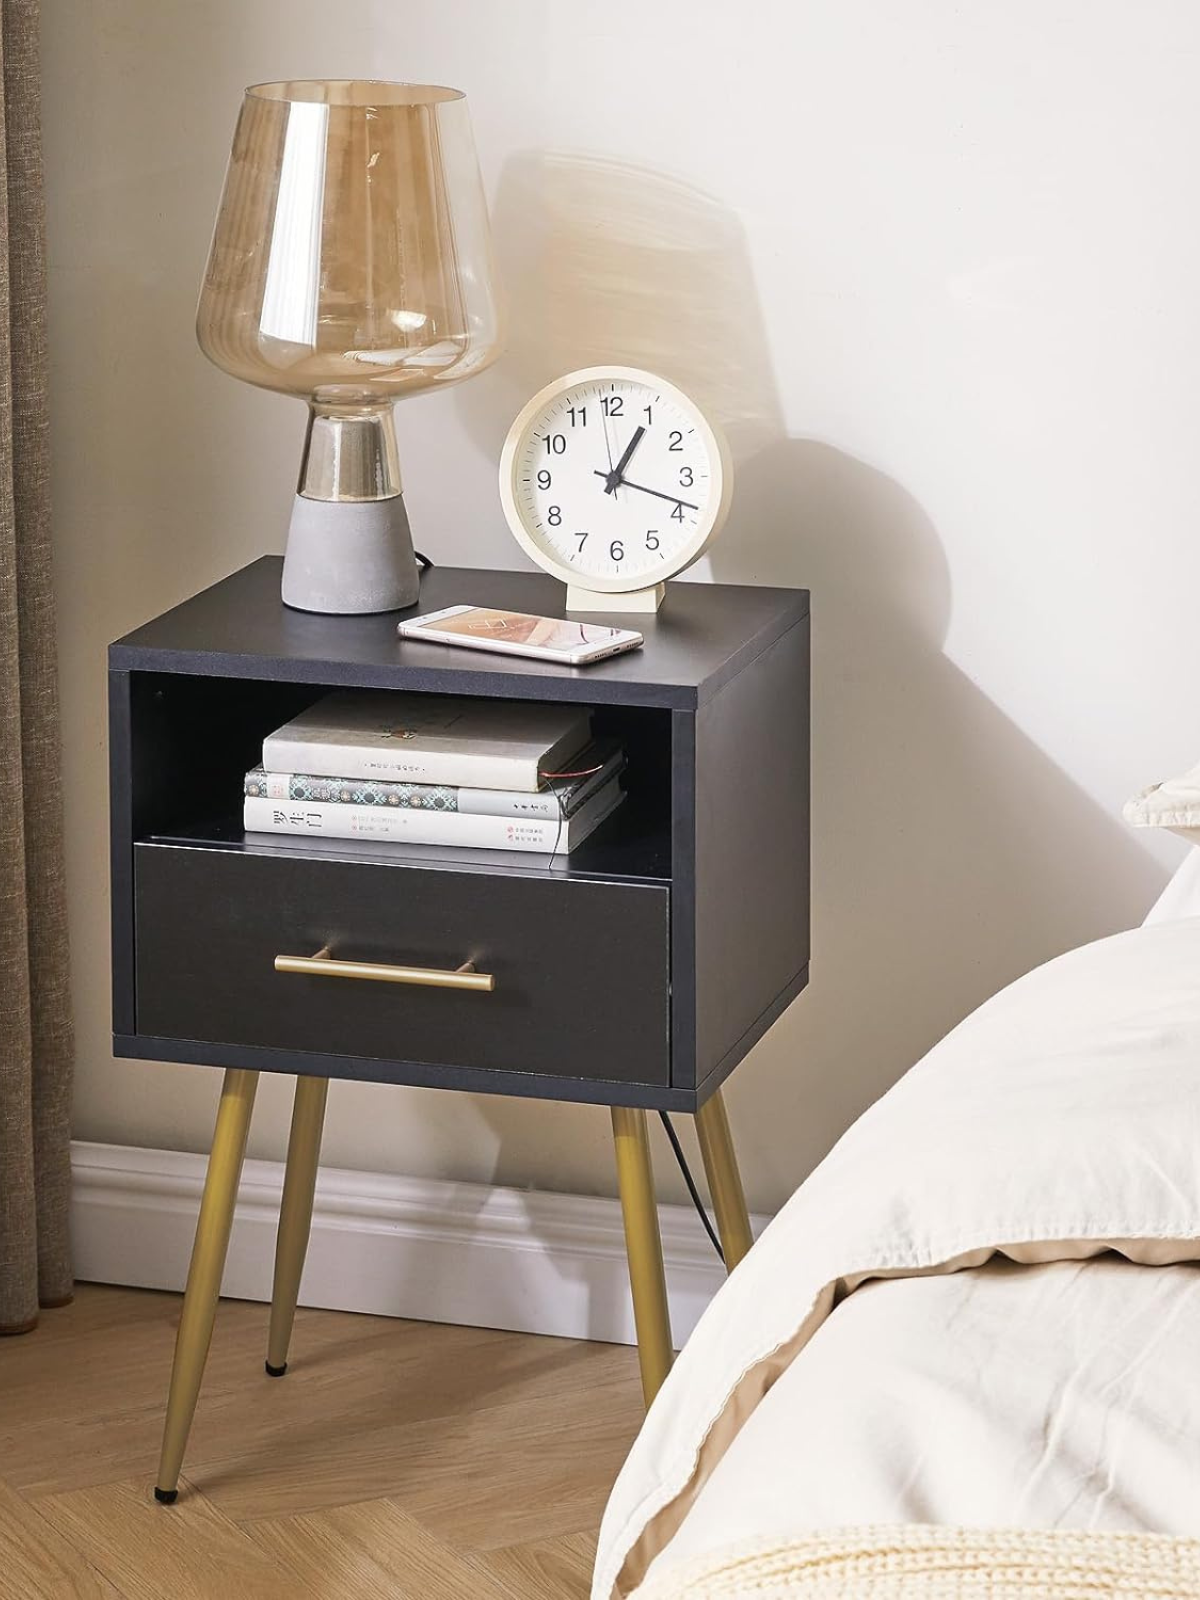 Mid-Century Modern Bedside Table with Legs, Minimalist and Practical End Side Table with 2 Tiers Storage Space, for Bedroom, Living Room, Black